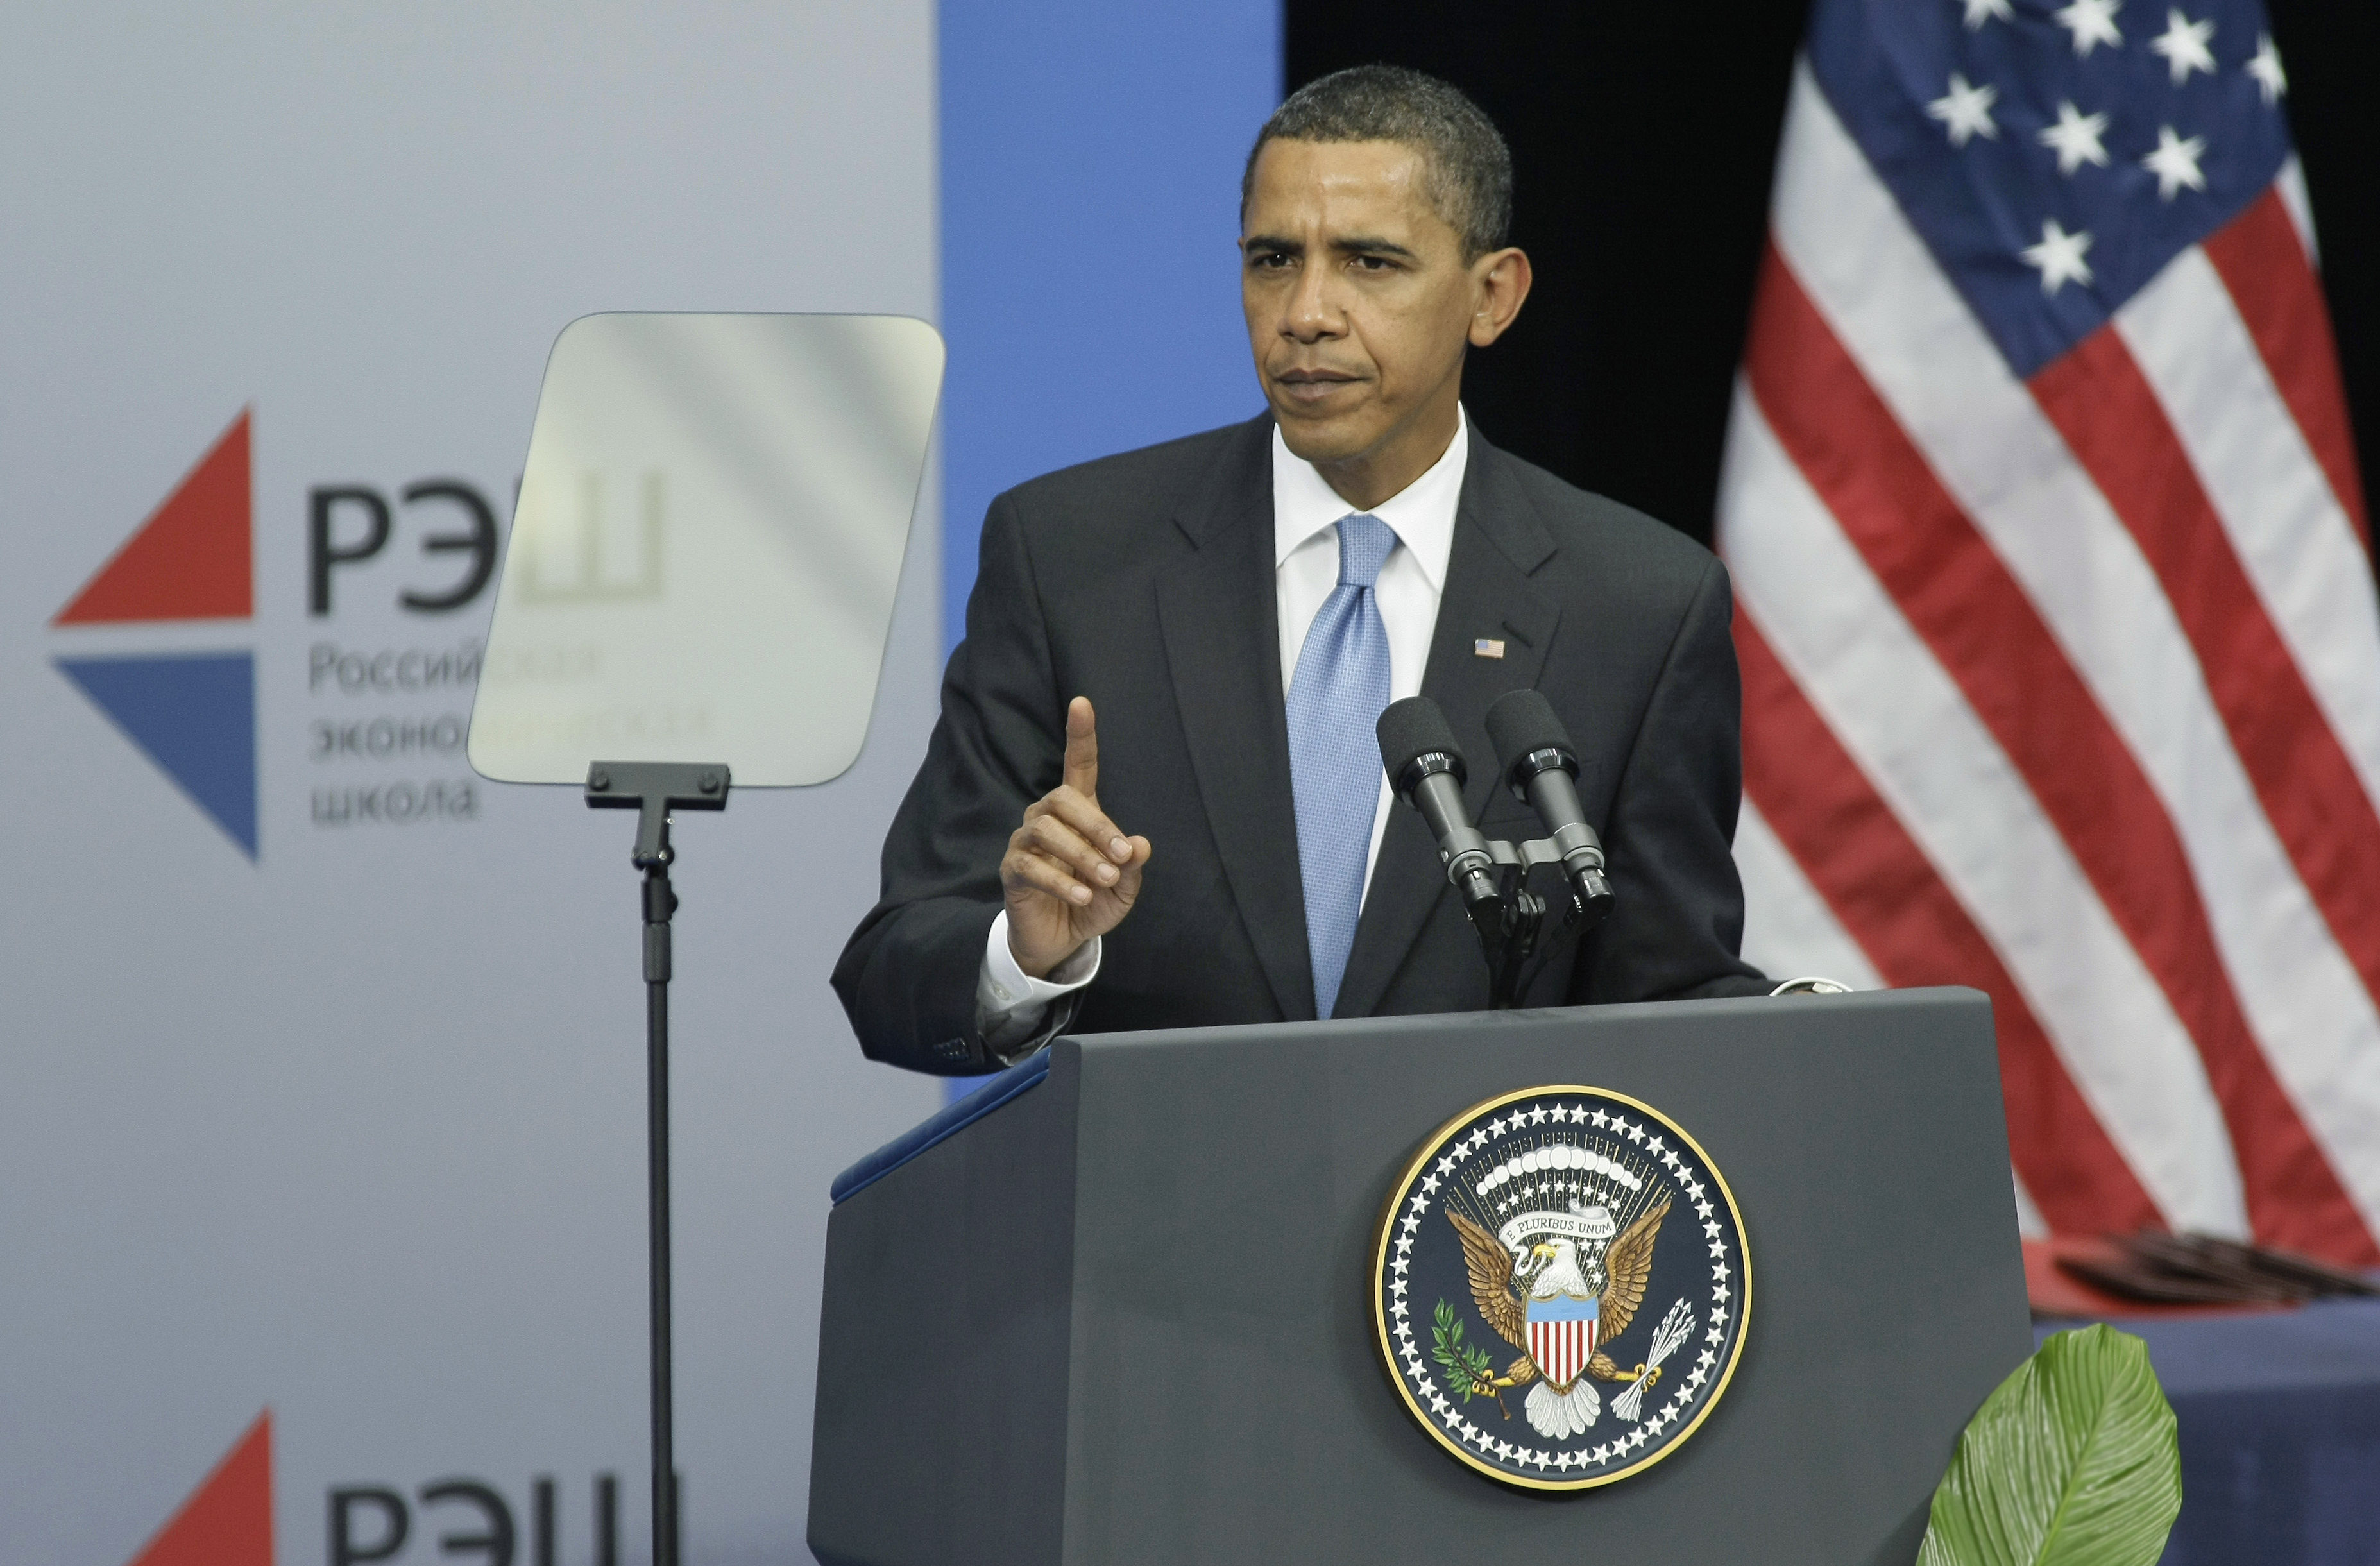 U.S. President Barack Obama, speaks at a graduation ceremony at the New Economic School in Moscow, Russia, on Tuesday, July 7, 2009. (Alexander Zemlianichenko Jr—Bloomberg / Getty Images)